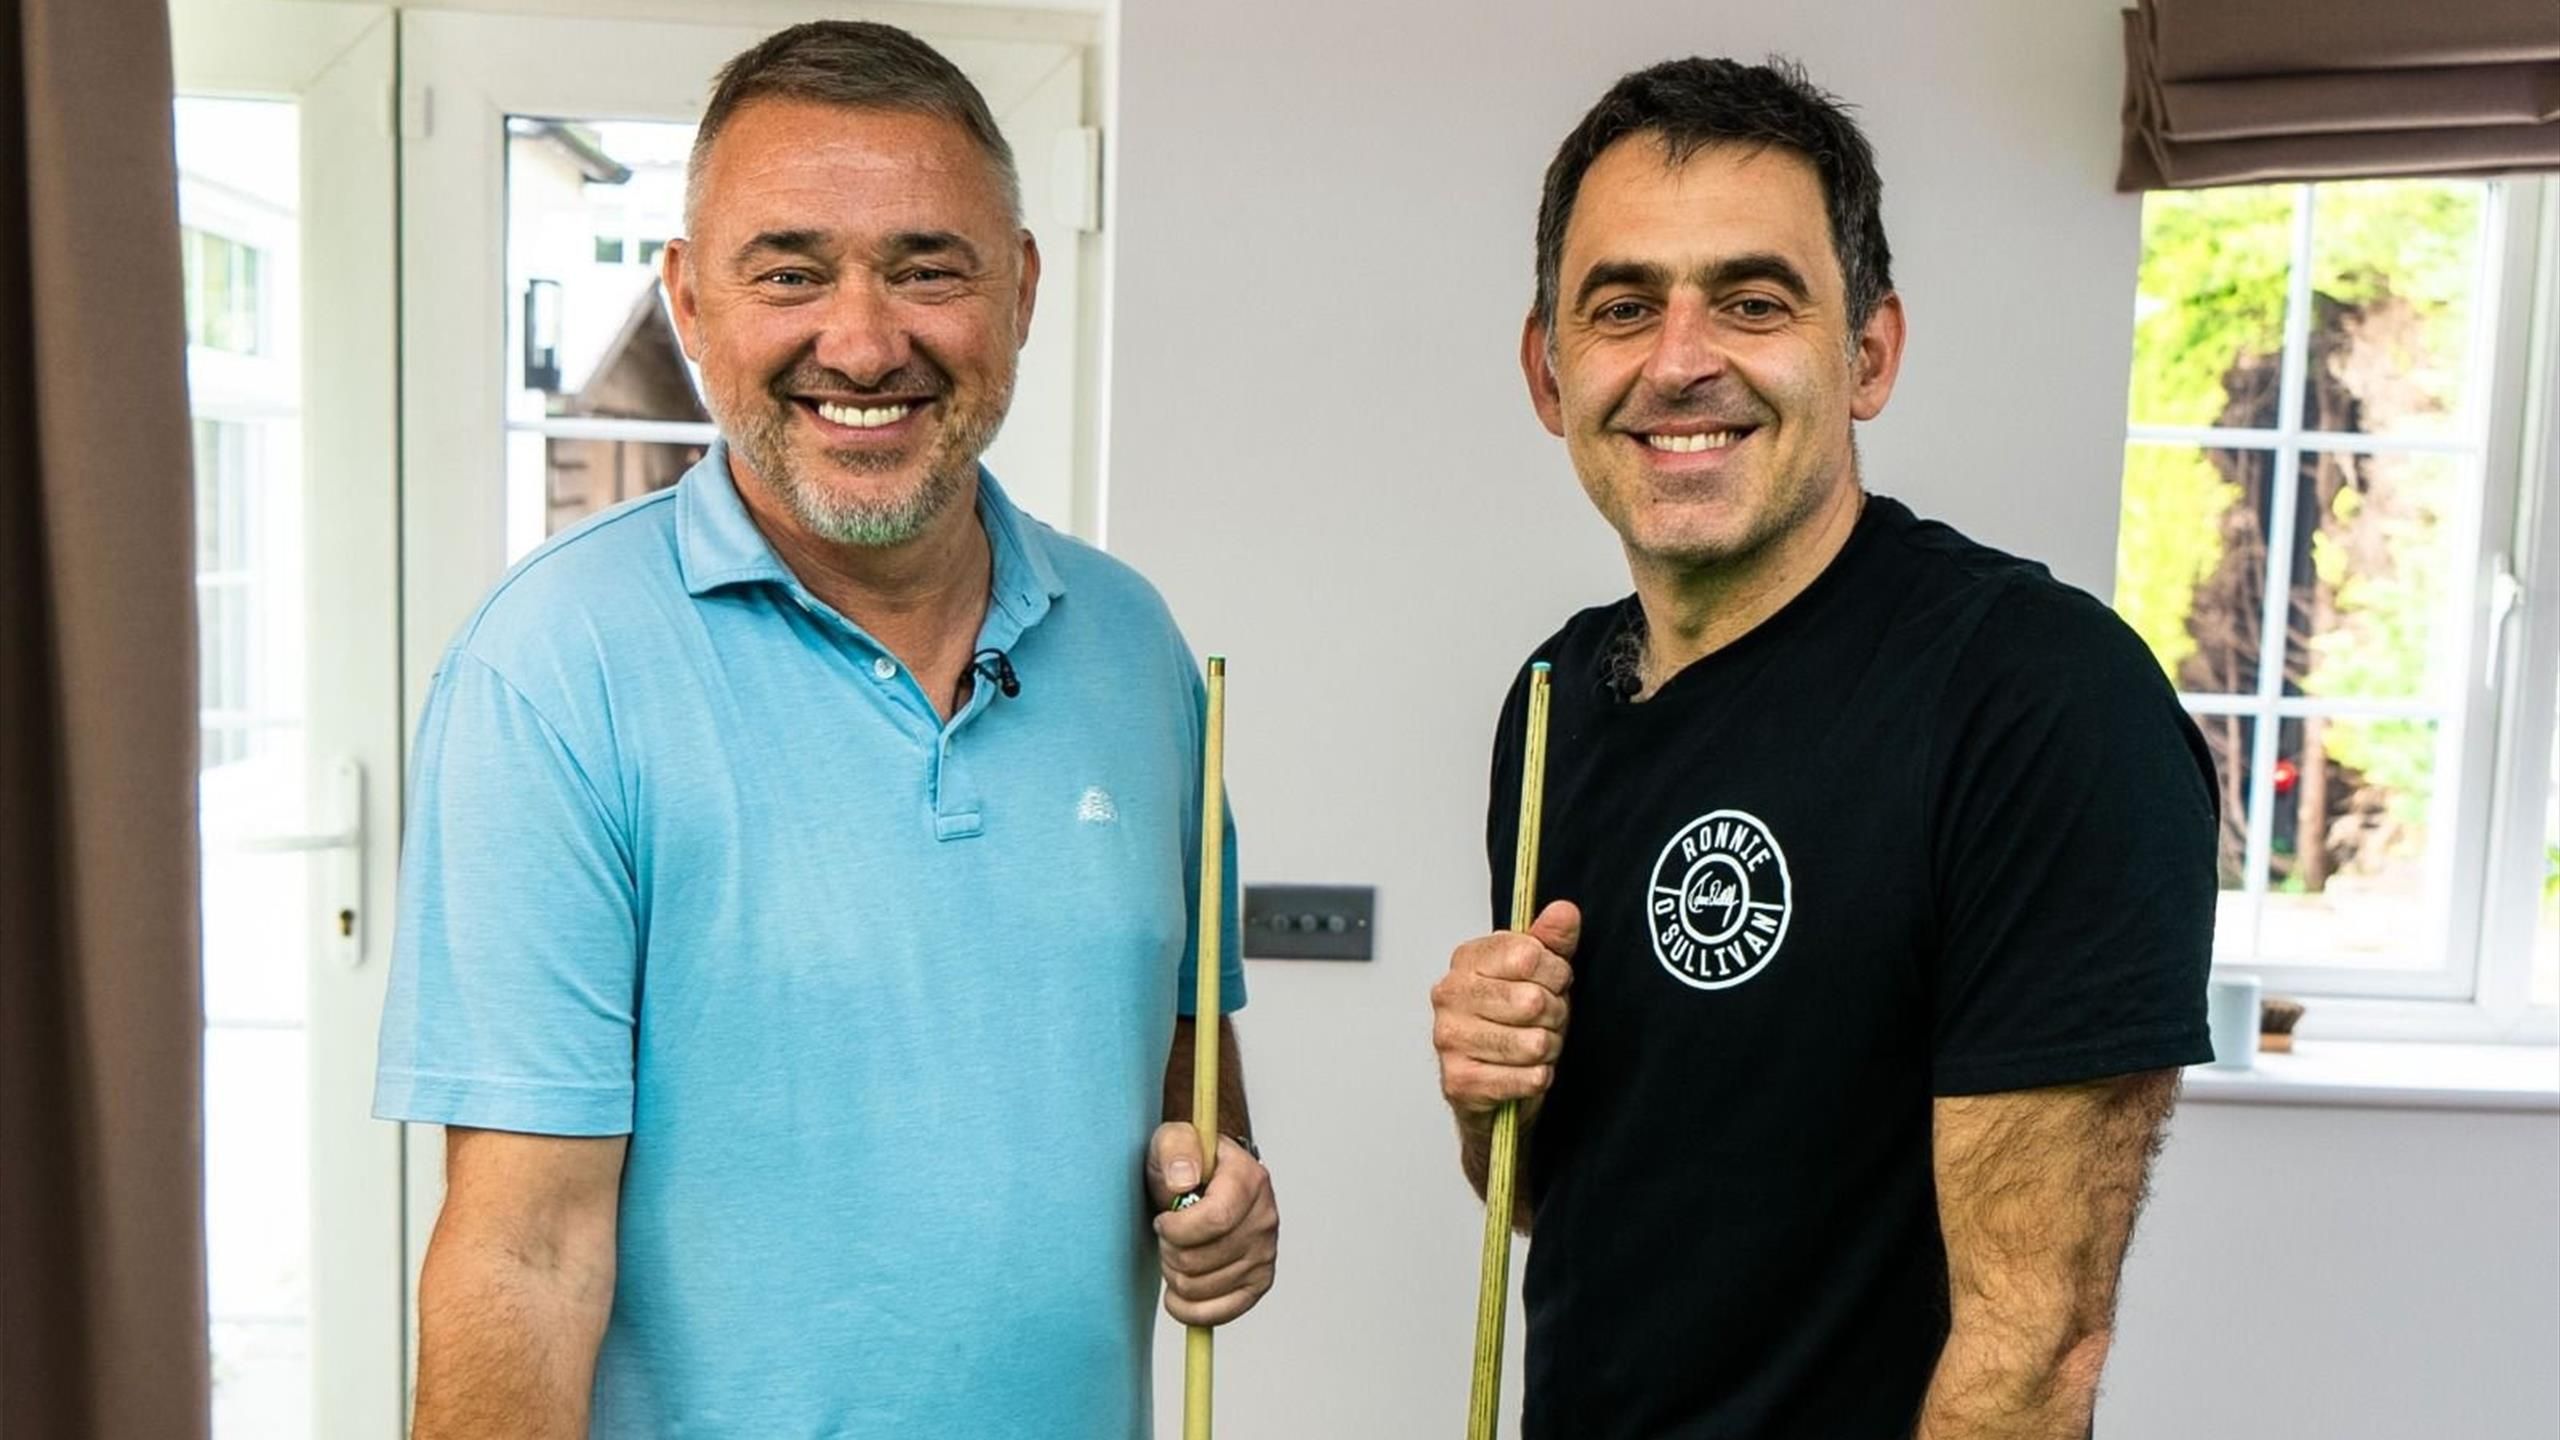 When is next snooker tournament of new season? Stephen Hendry, Ronnie OSullivan and Jimmy White compete at British Open